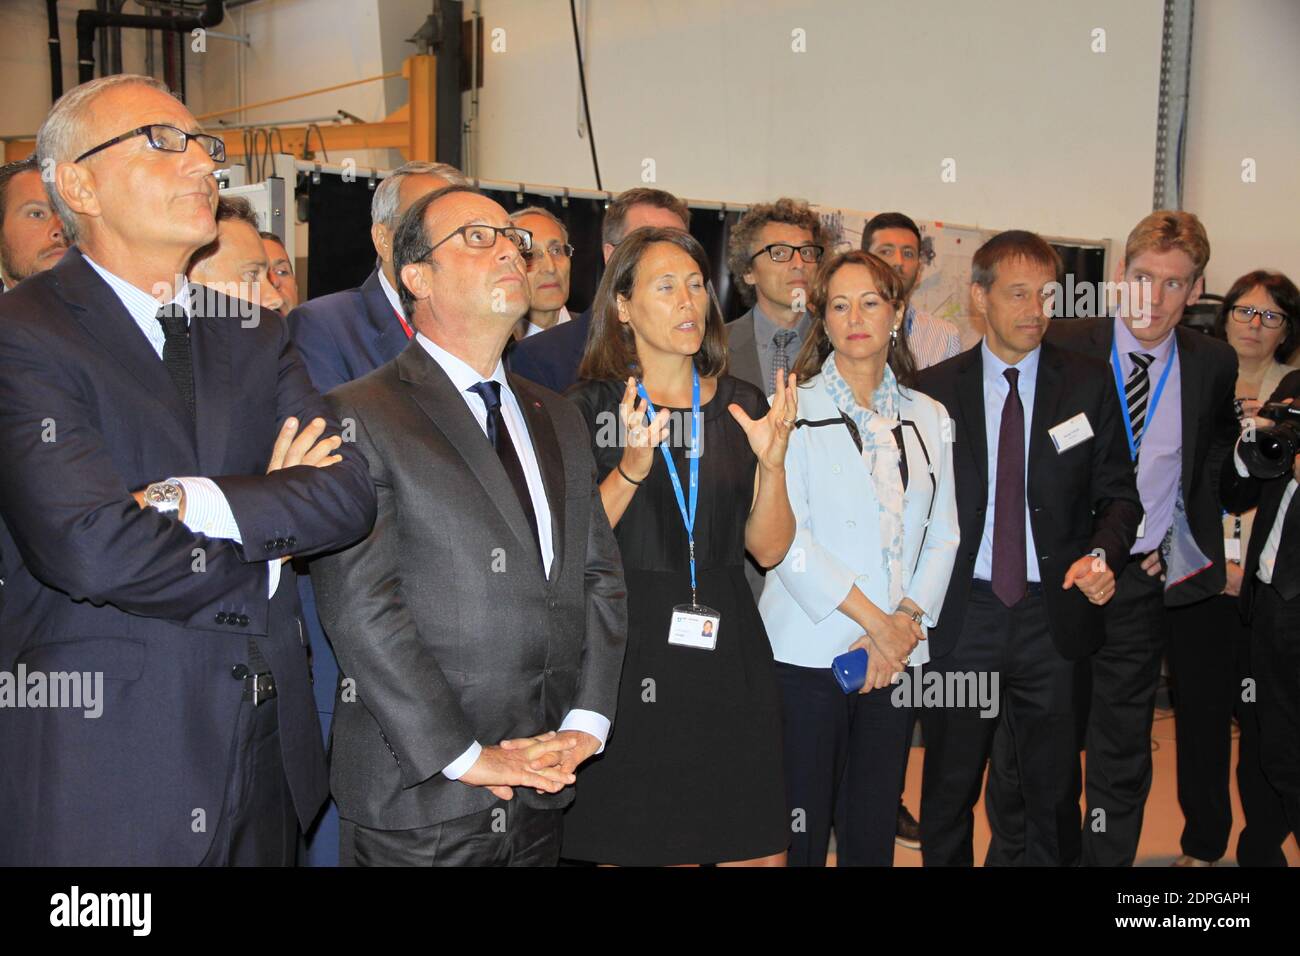 French President Francois Hollande along with Minister of Ecology, Sustainable Development and Energy Segolene Royal and Secretary of State for Regional Reform Andre Vallini during a visit to the company Air Liquide Advanced Technologies, a world leader in gases, technologies and services for industry and health, in Sassenage, near Grenoble, eastern France on August 20, 2015. Photo by Xavier Vila/Pool/ABACAPRESS.COM Stock Photo